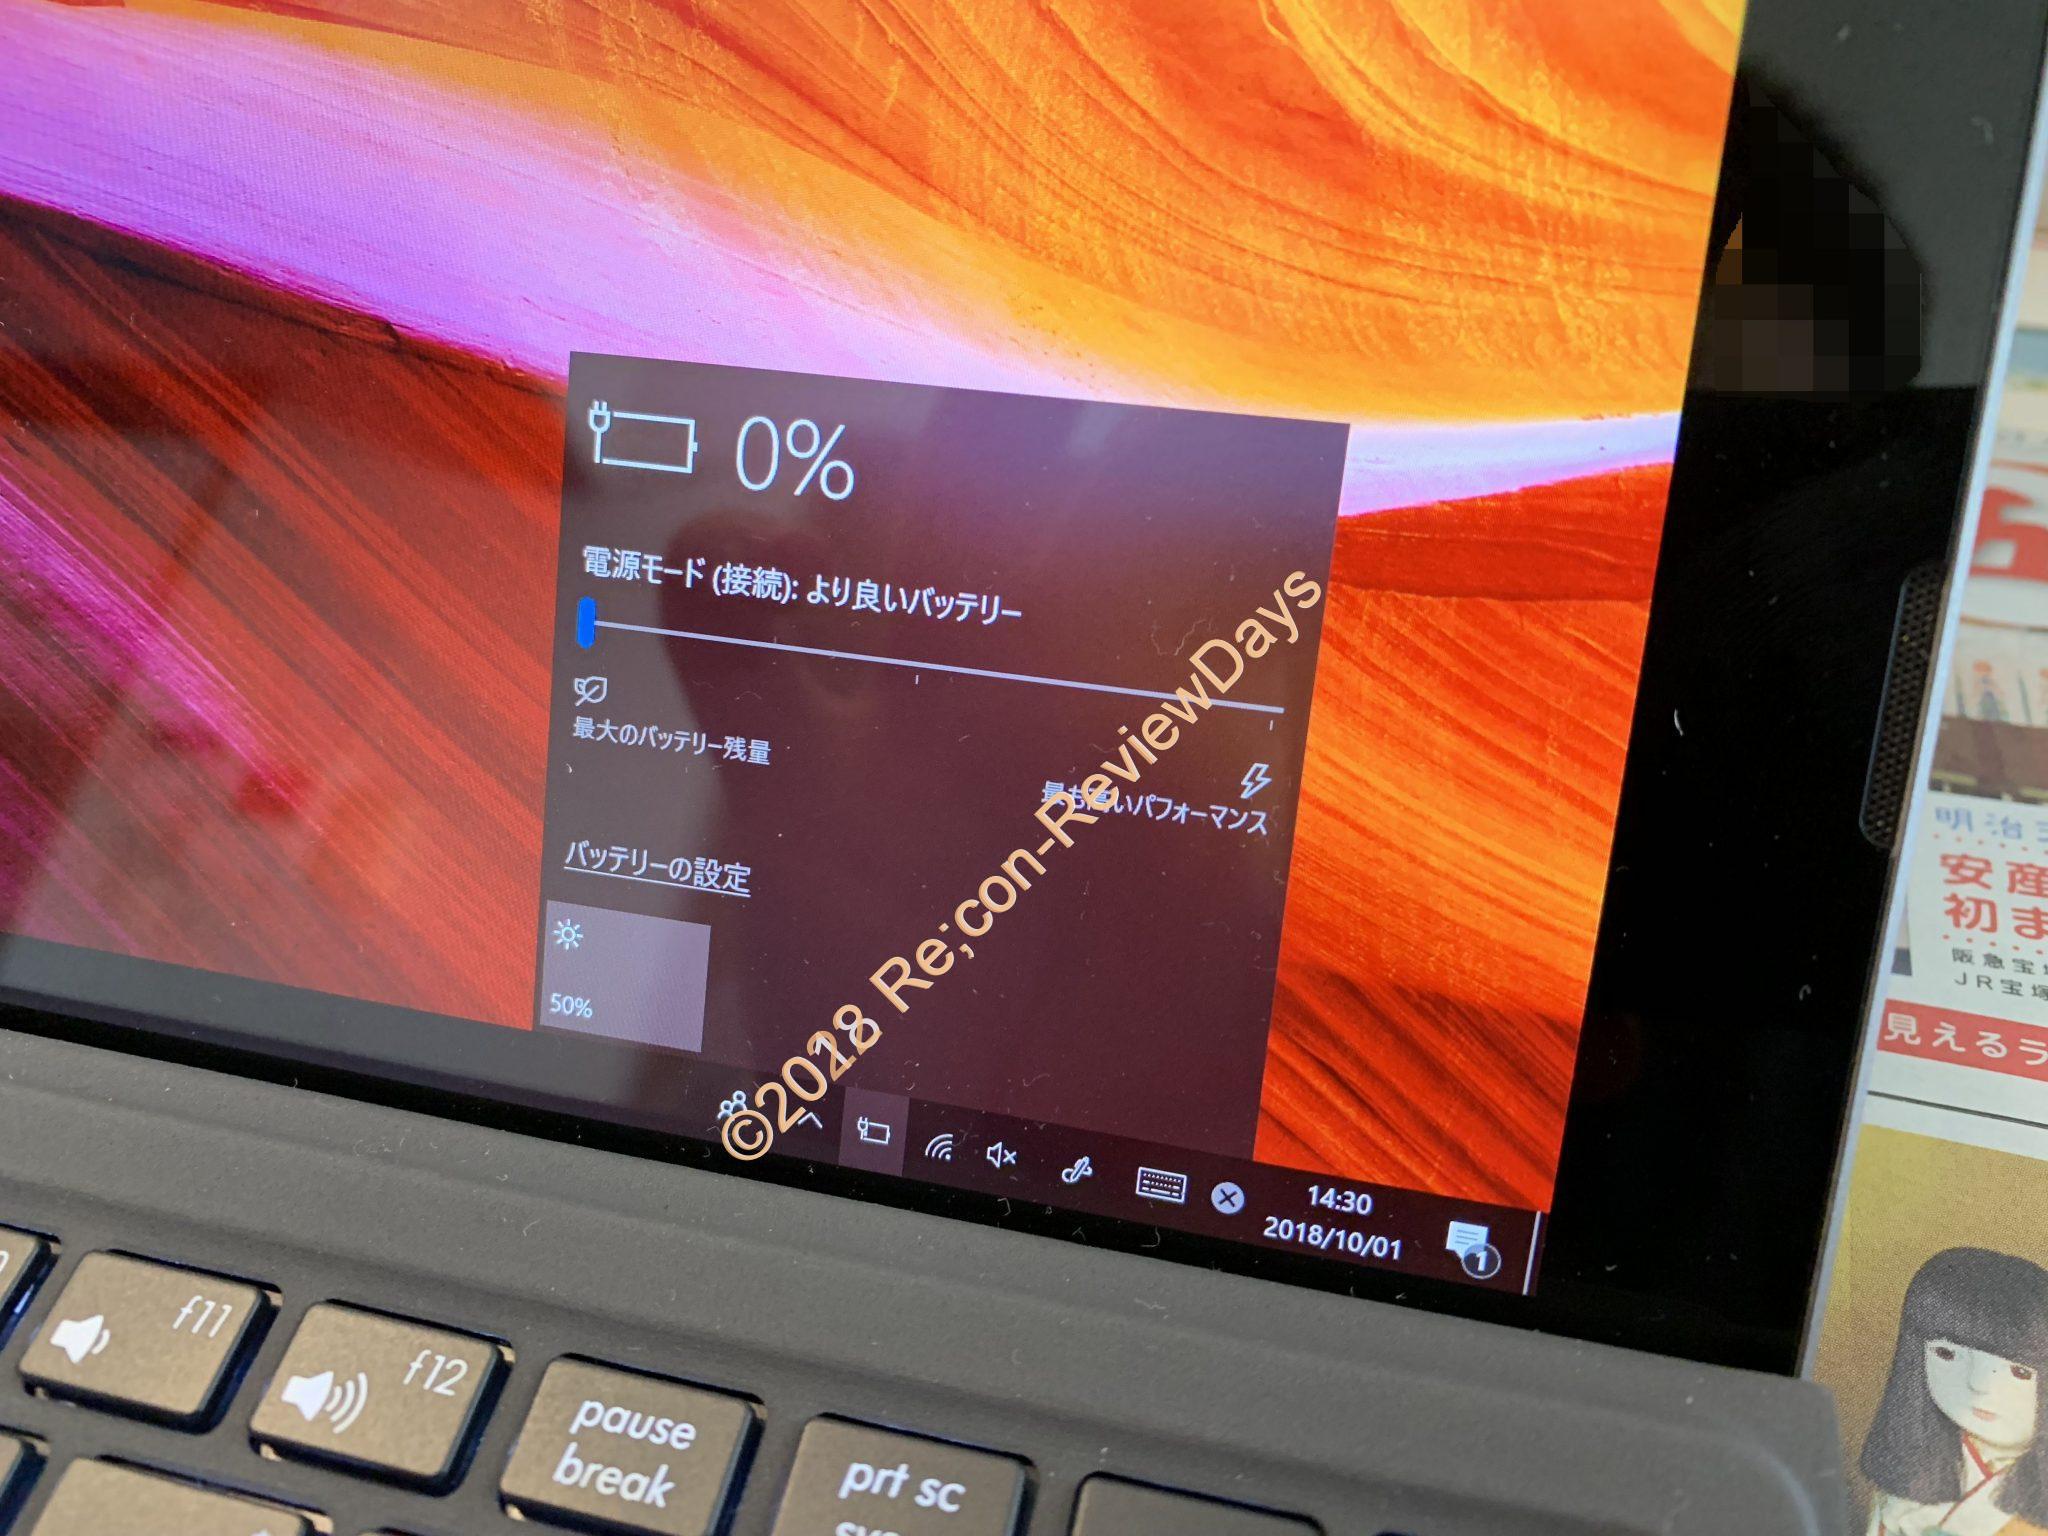 ASUS TransBook T303UAのバッテリーが不良で充電出来なくなりました #ASUS #TransBook #T303UA #2in1